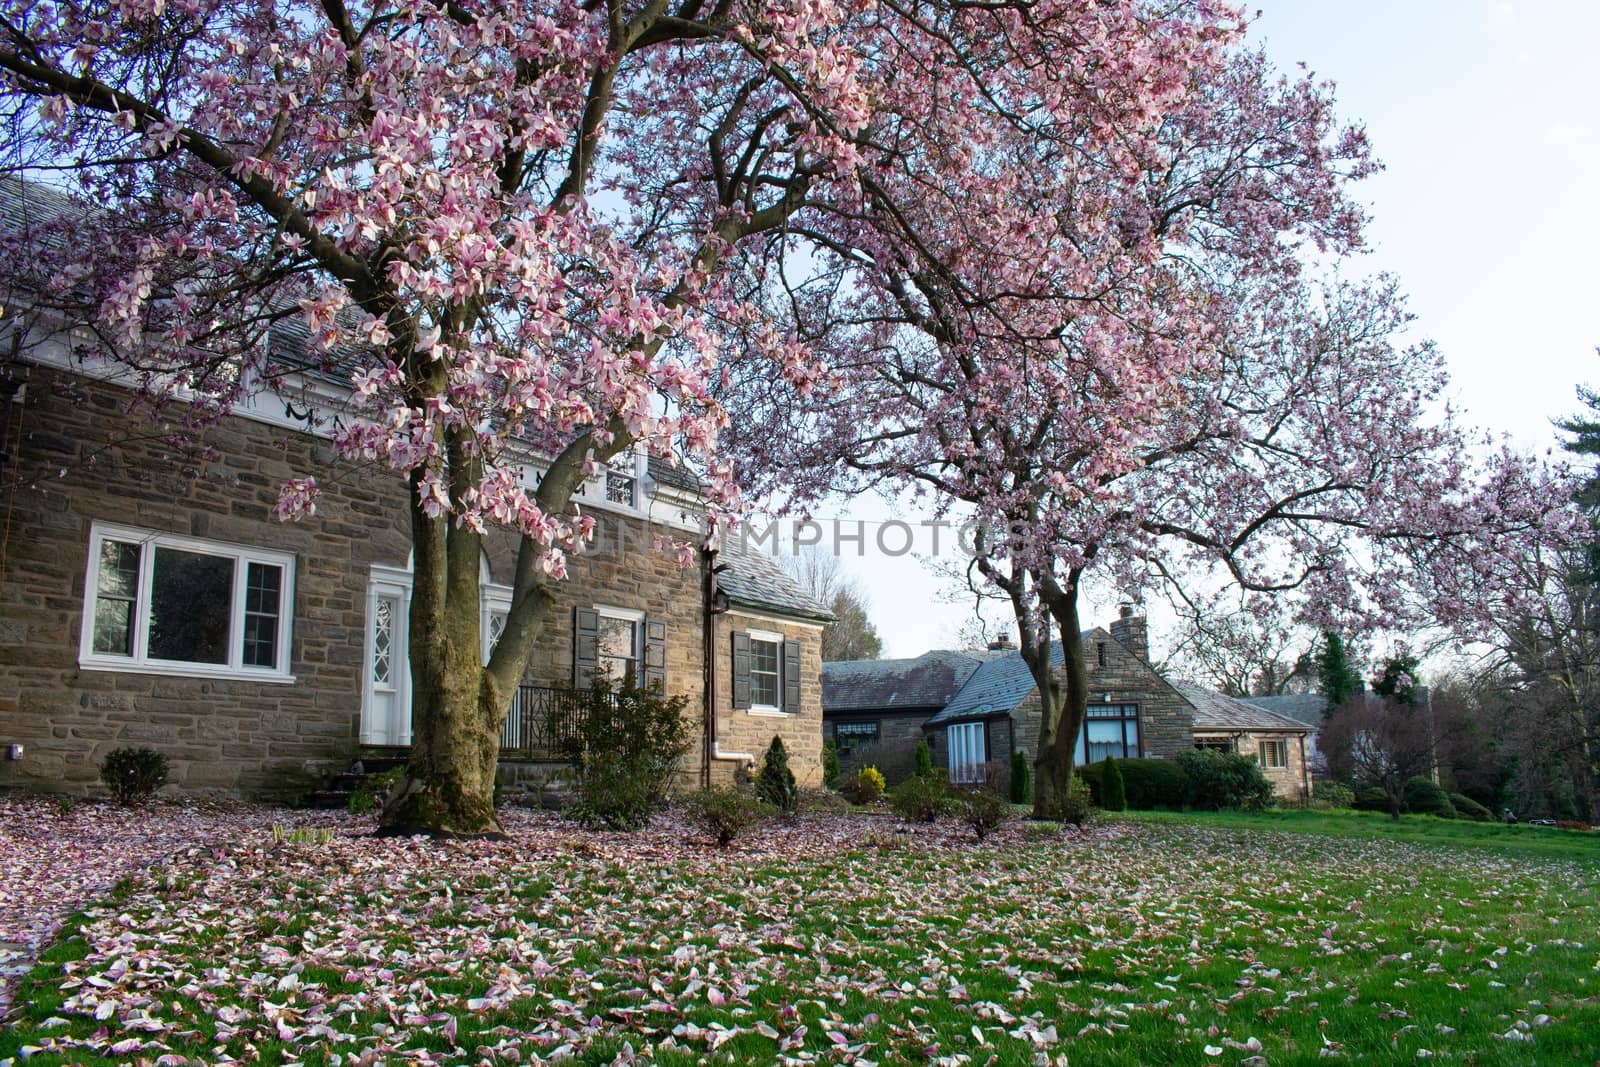 A Large Cobblestone Suburban Home With Two Cherry Blossom Trees Out Front at Sunrise And the Lawn Covered in Pink Petals